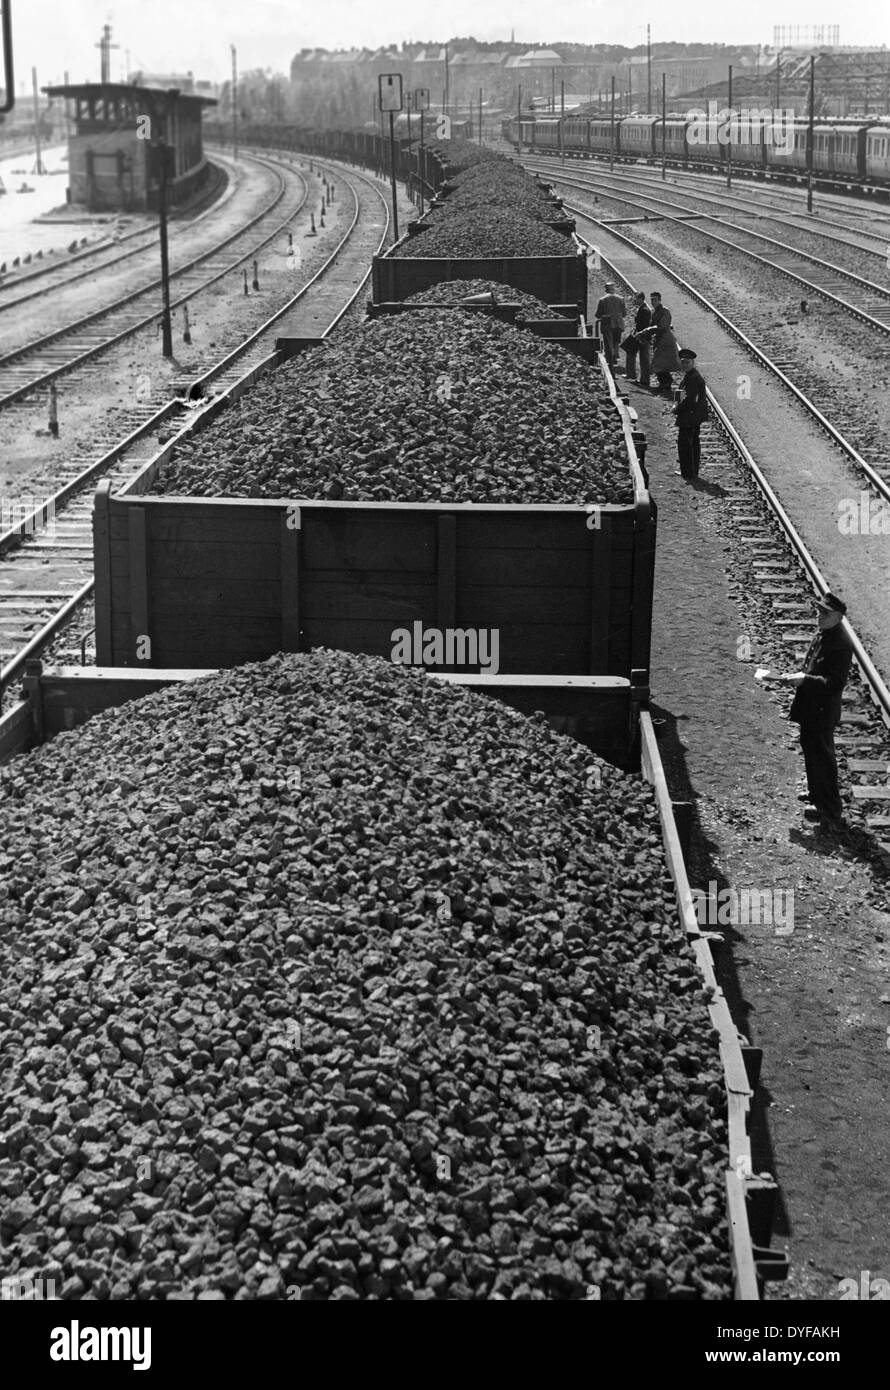 Workers at a freight train filled with coal to be transported to West Berlin households in Berlin, Germany, 1949. Photo: zbarchiv - NO WIRE SERVICE Stock Photo